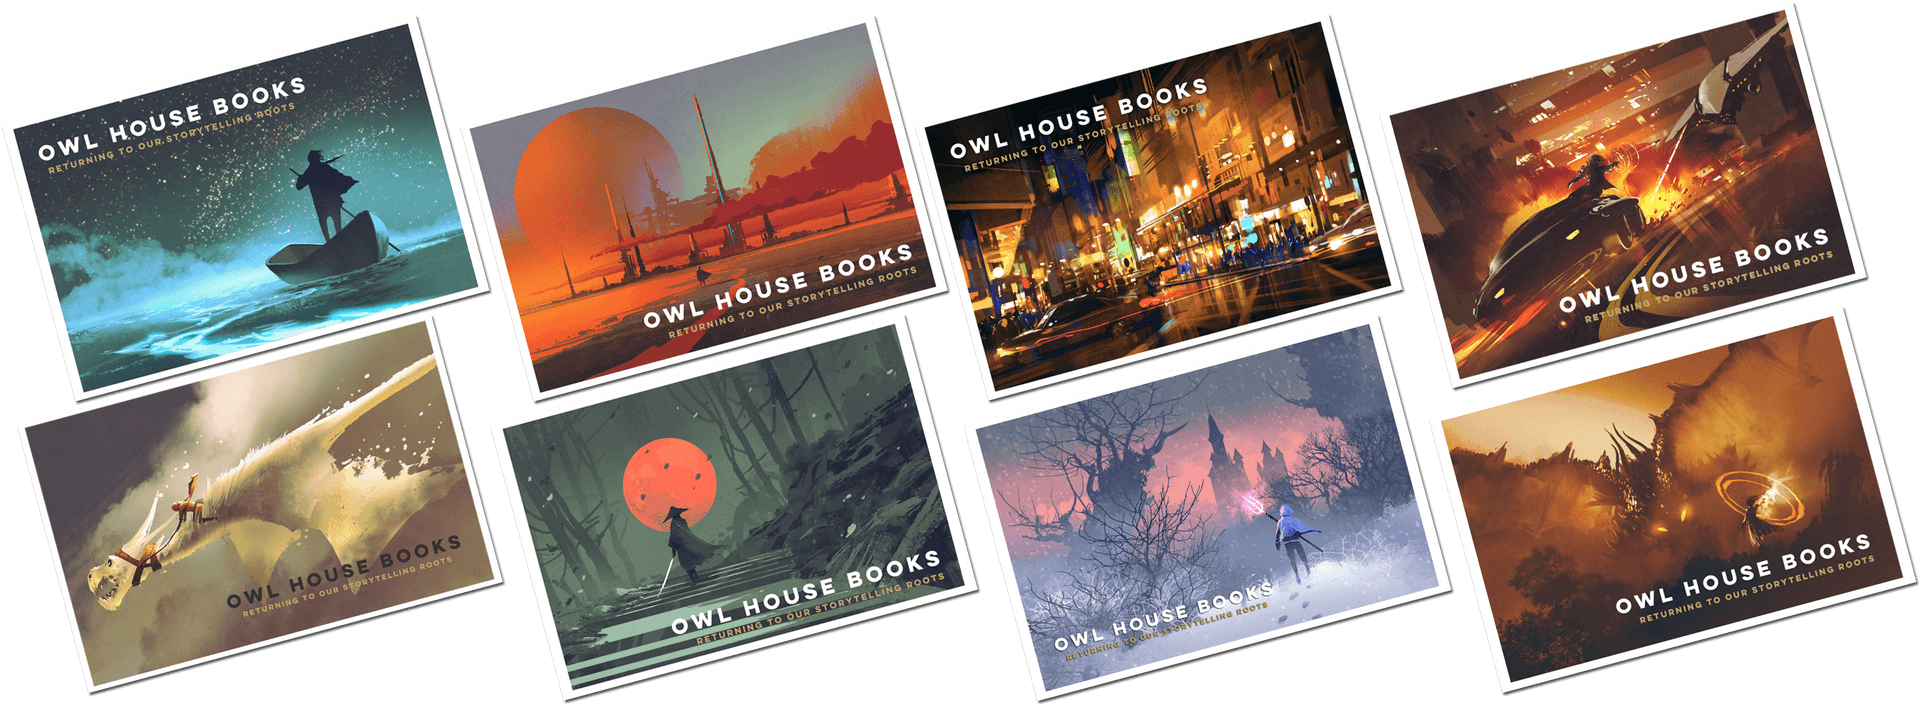 Owl House Books Postcard Collection PNG